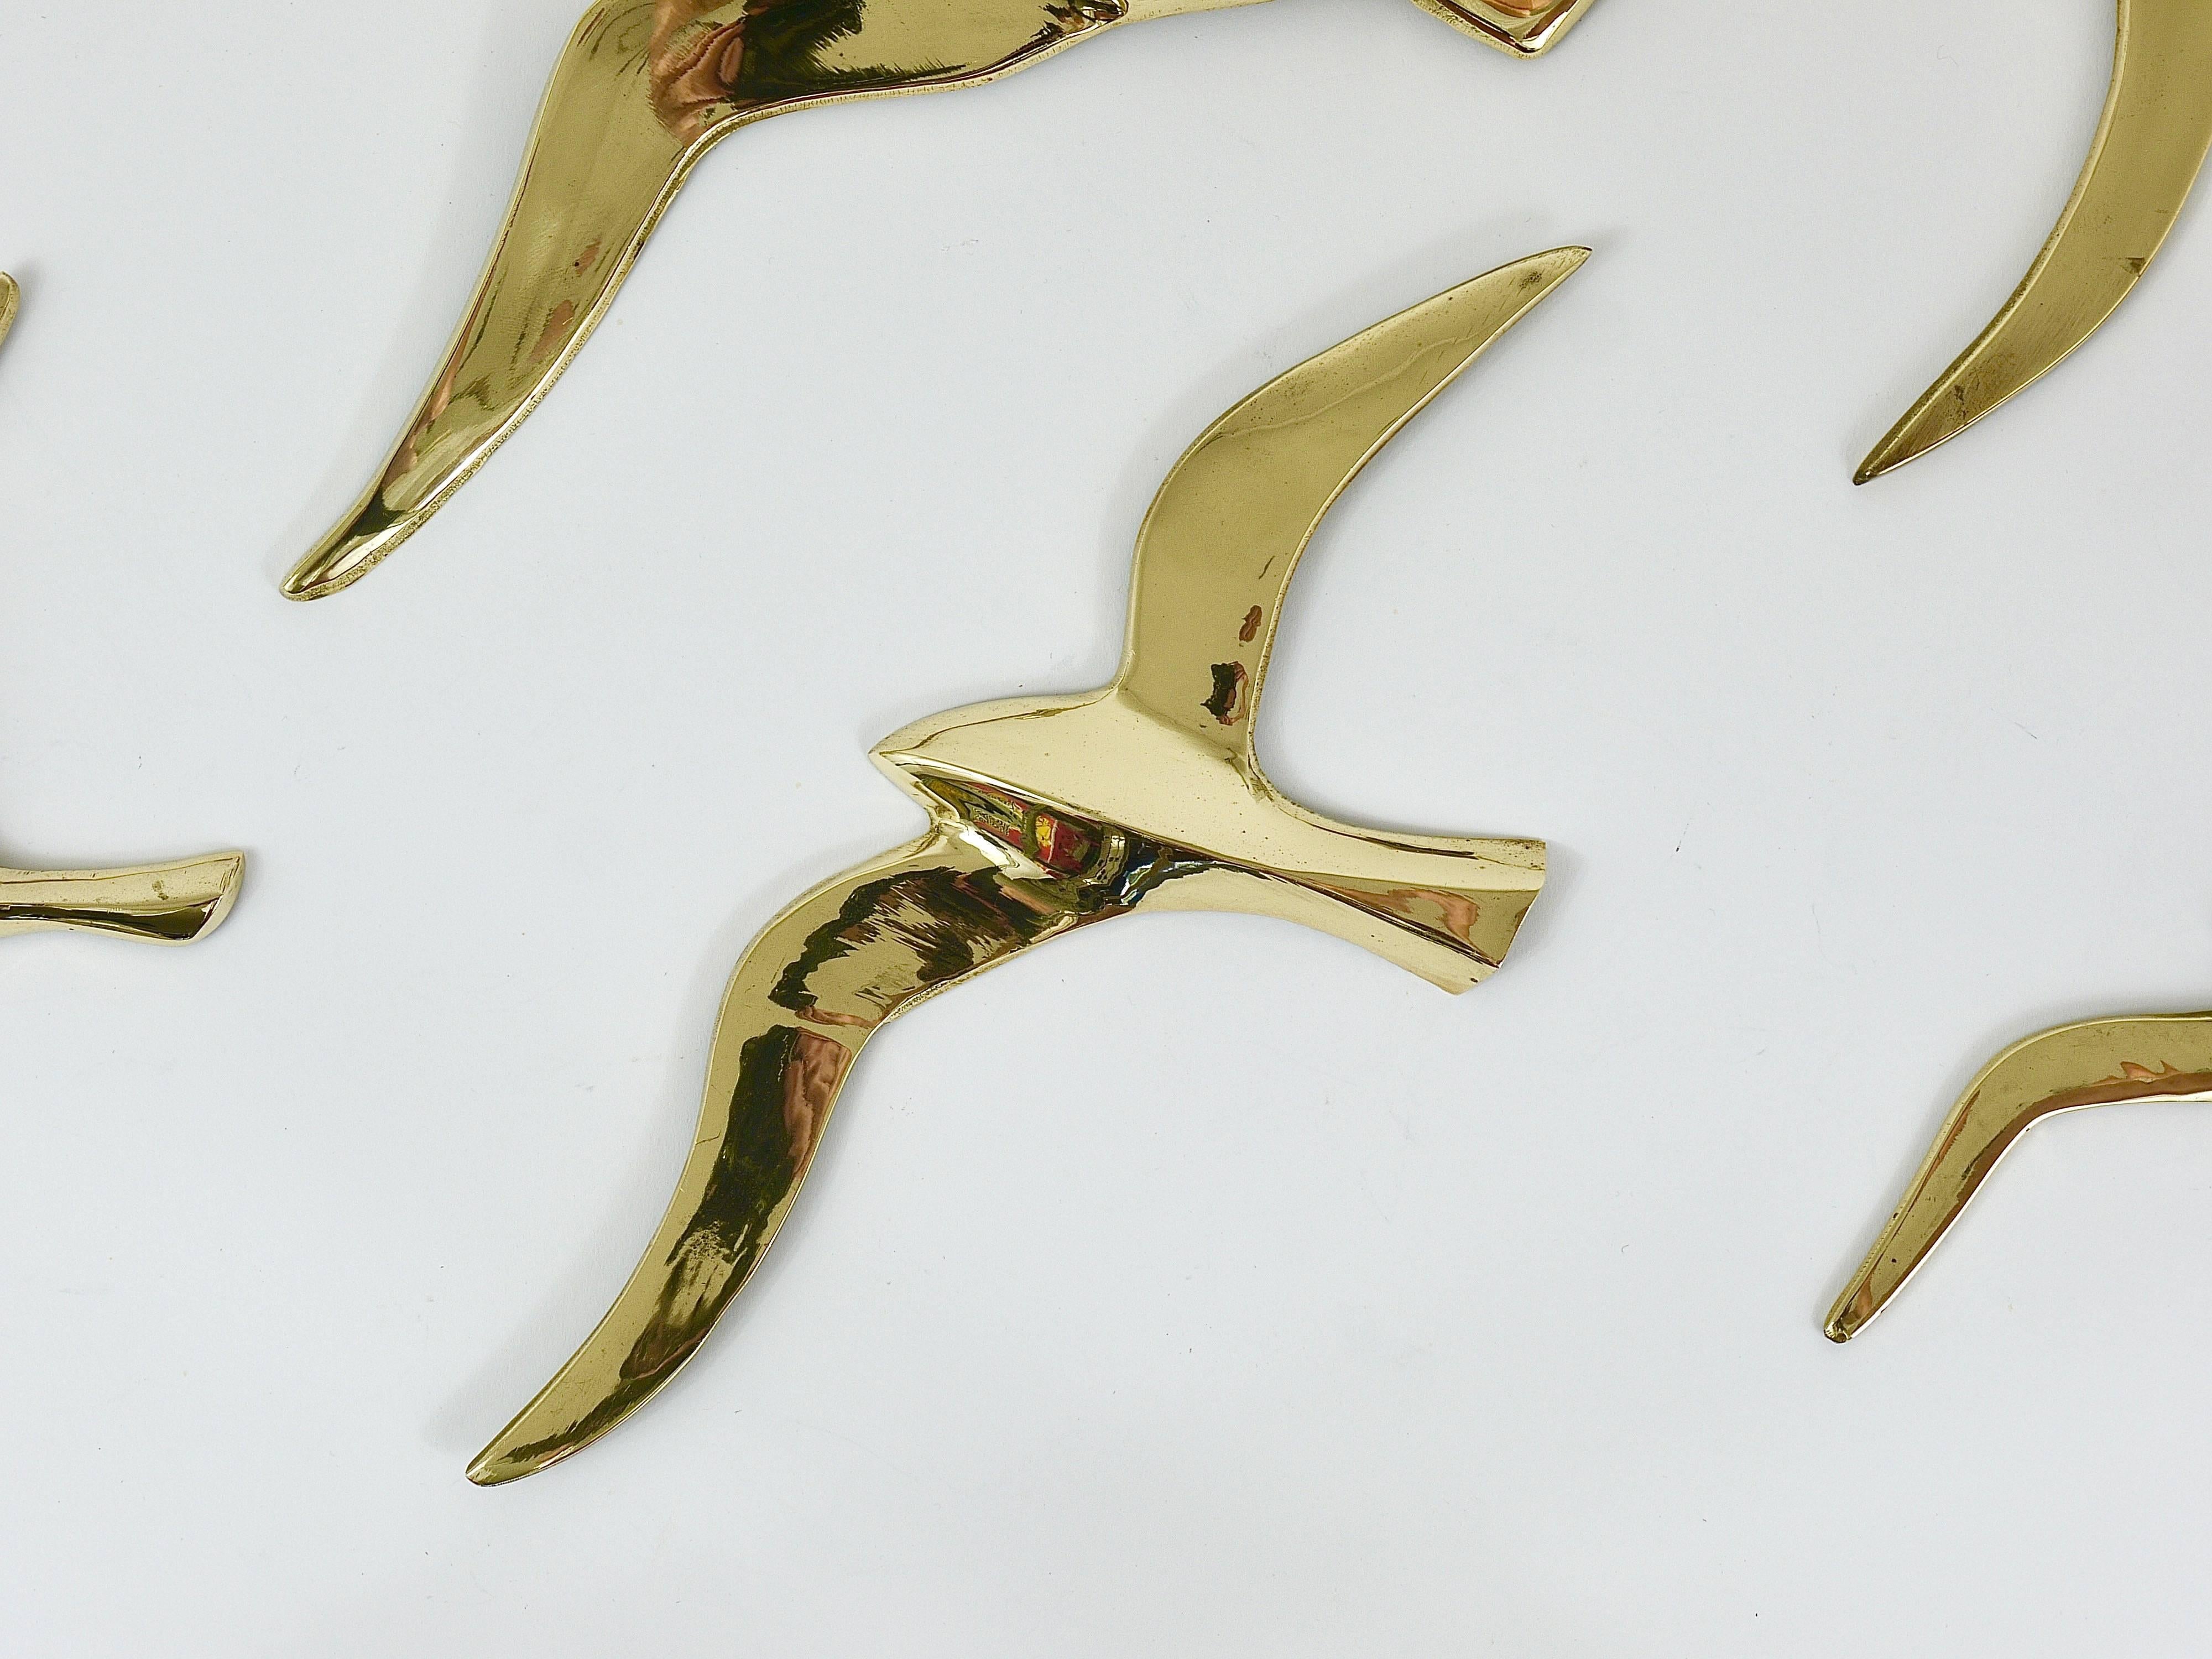 A set of nine lovely wall-mounted modernist birds / gulls. Handmade of brass in the 1950s in Austria. Gently polished, in very good condition with marginal patina. Measures: Width of the birds: 14 to 8 in.